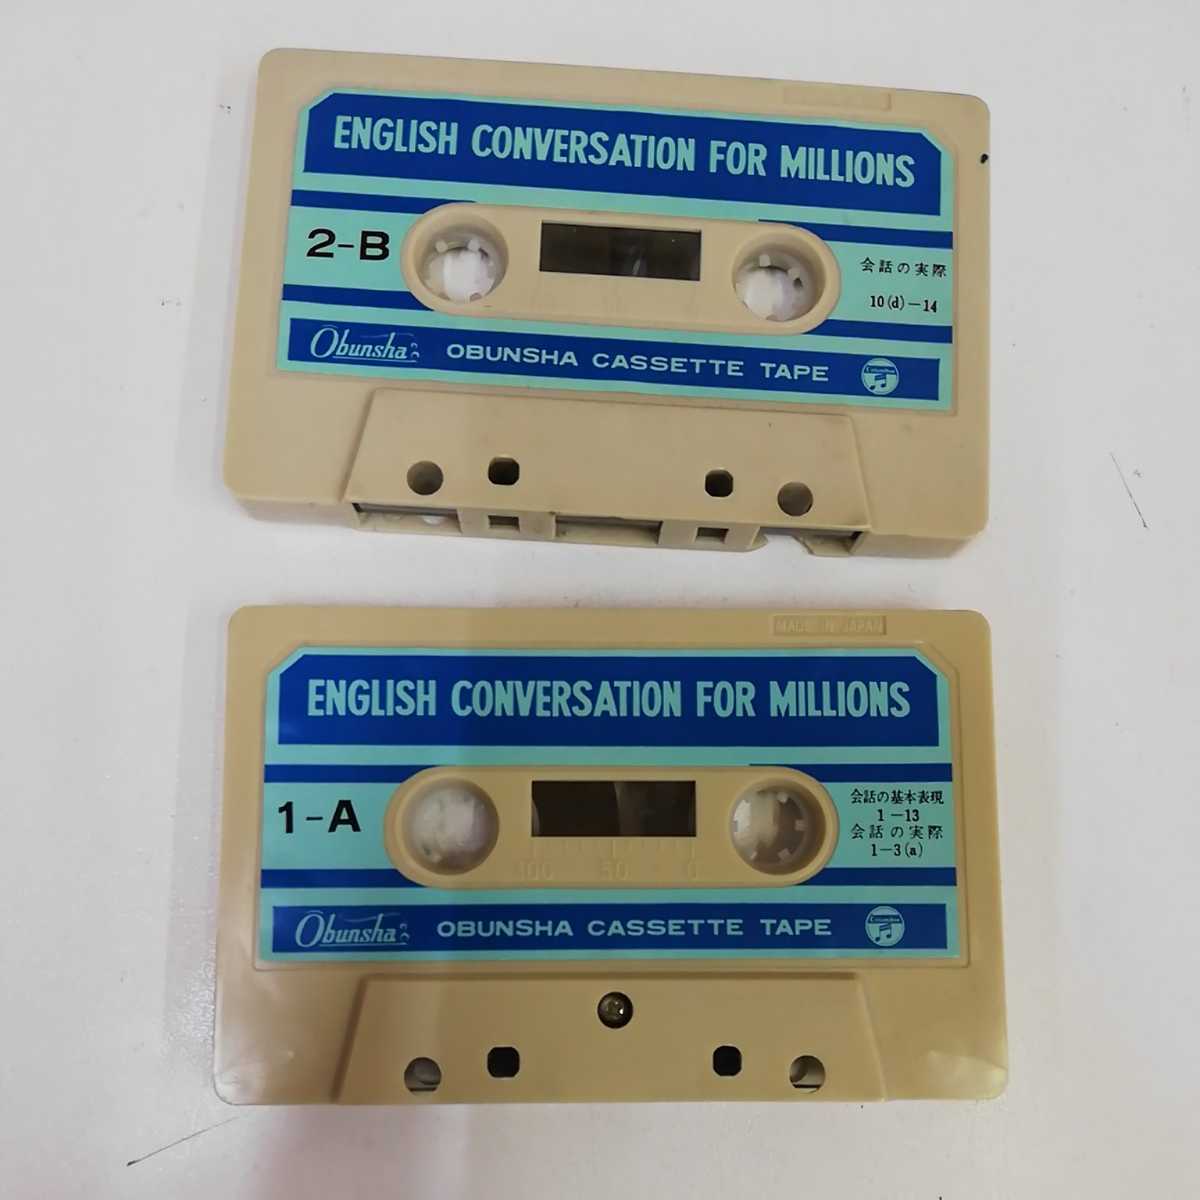 1_V cassette tape 100 ten thousand person. English conversation modified . new record 2 pcs insertion 2 hour . writing company practical use conversation. the best guide operation not yet verification 2 pcs set 